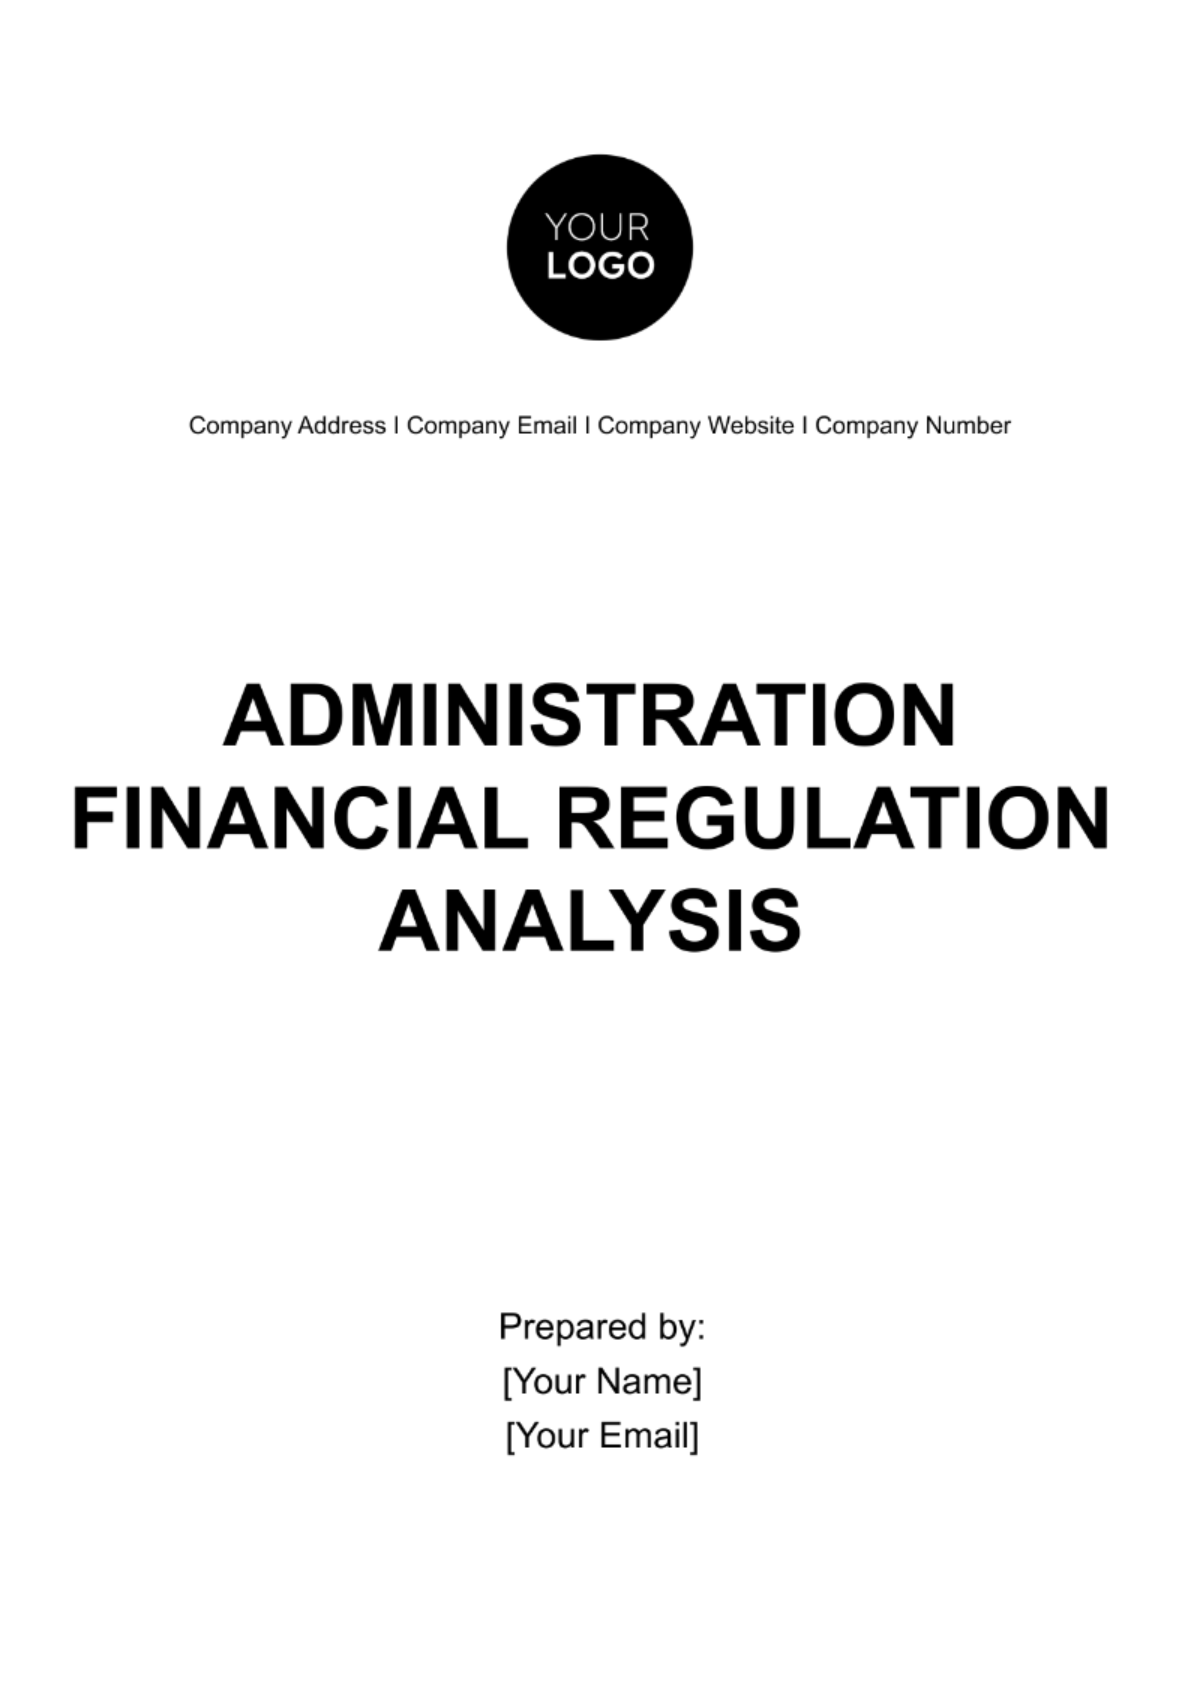 Free Administration Financial Regulation Analysis Template